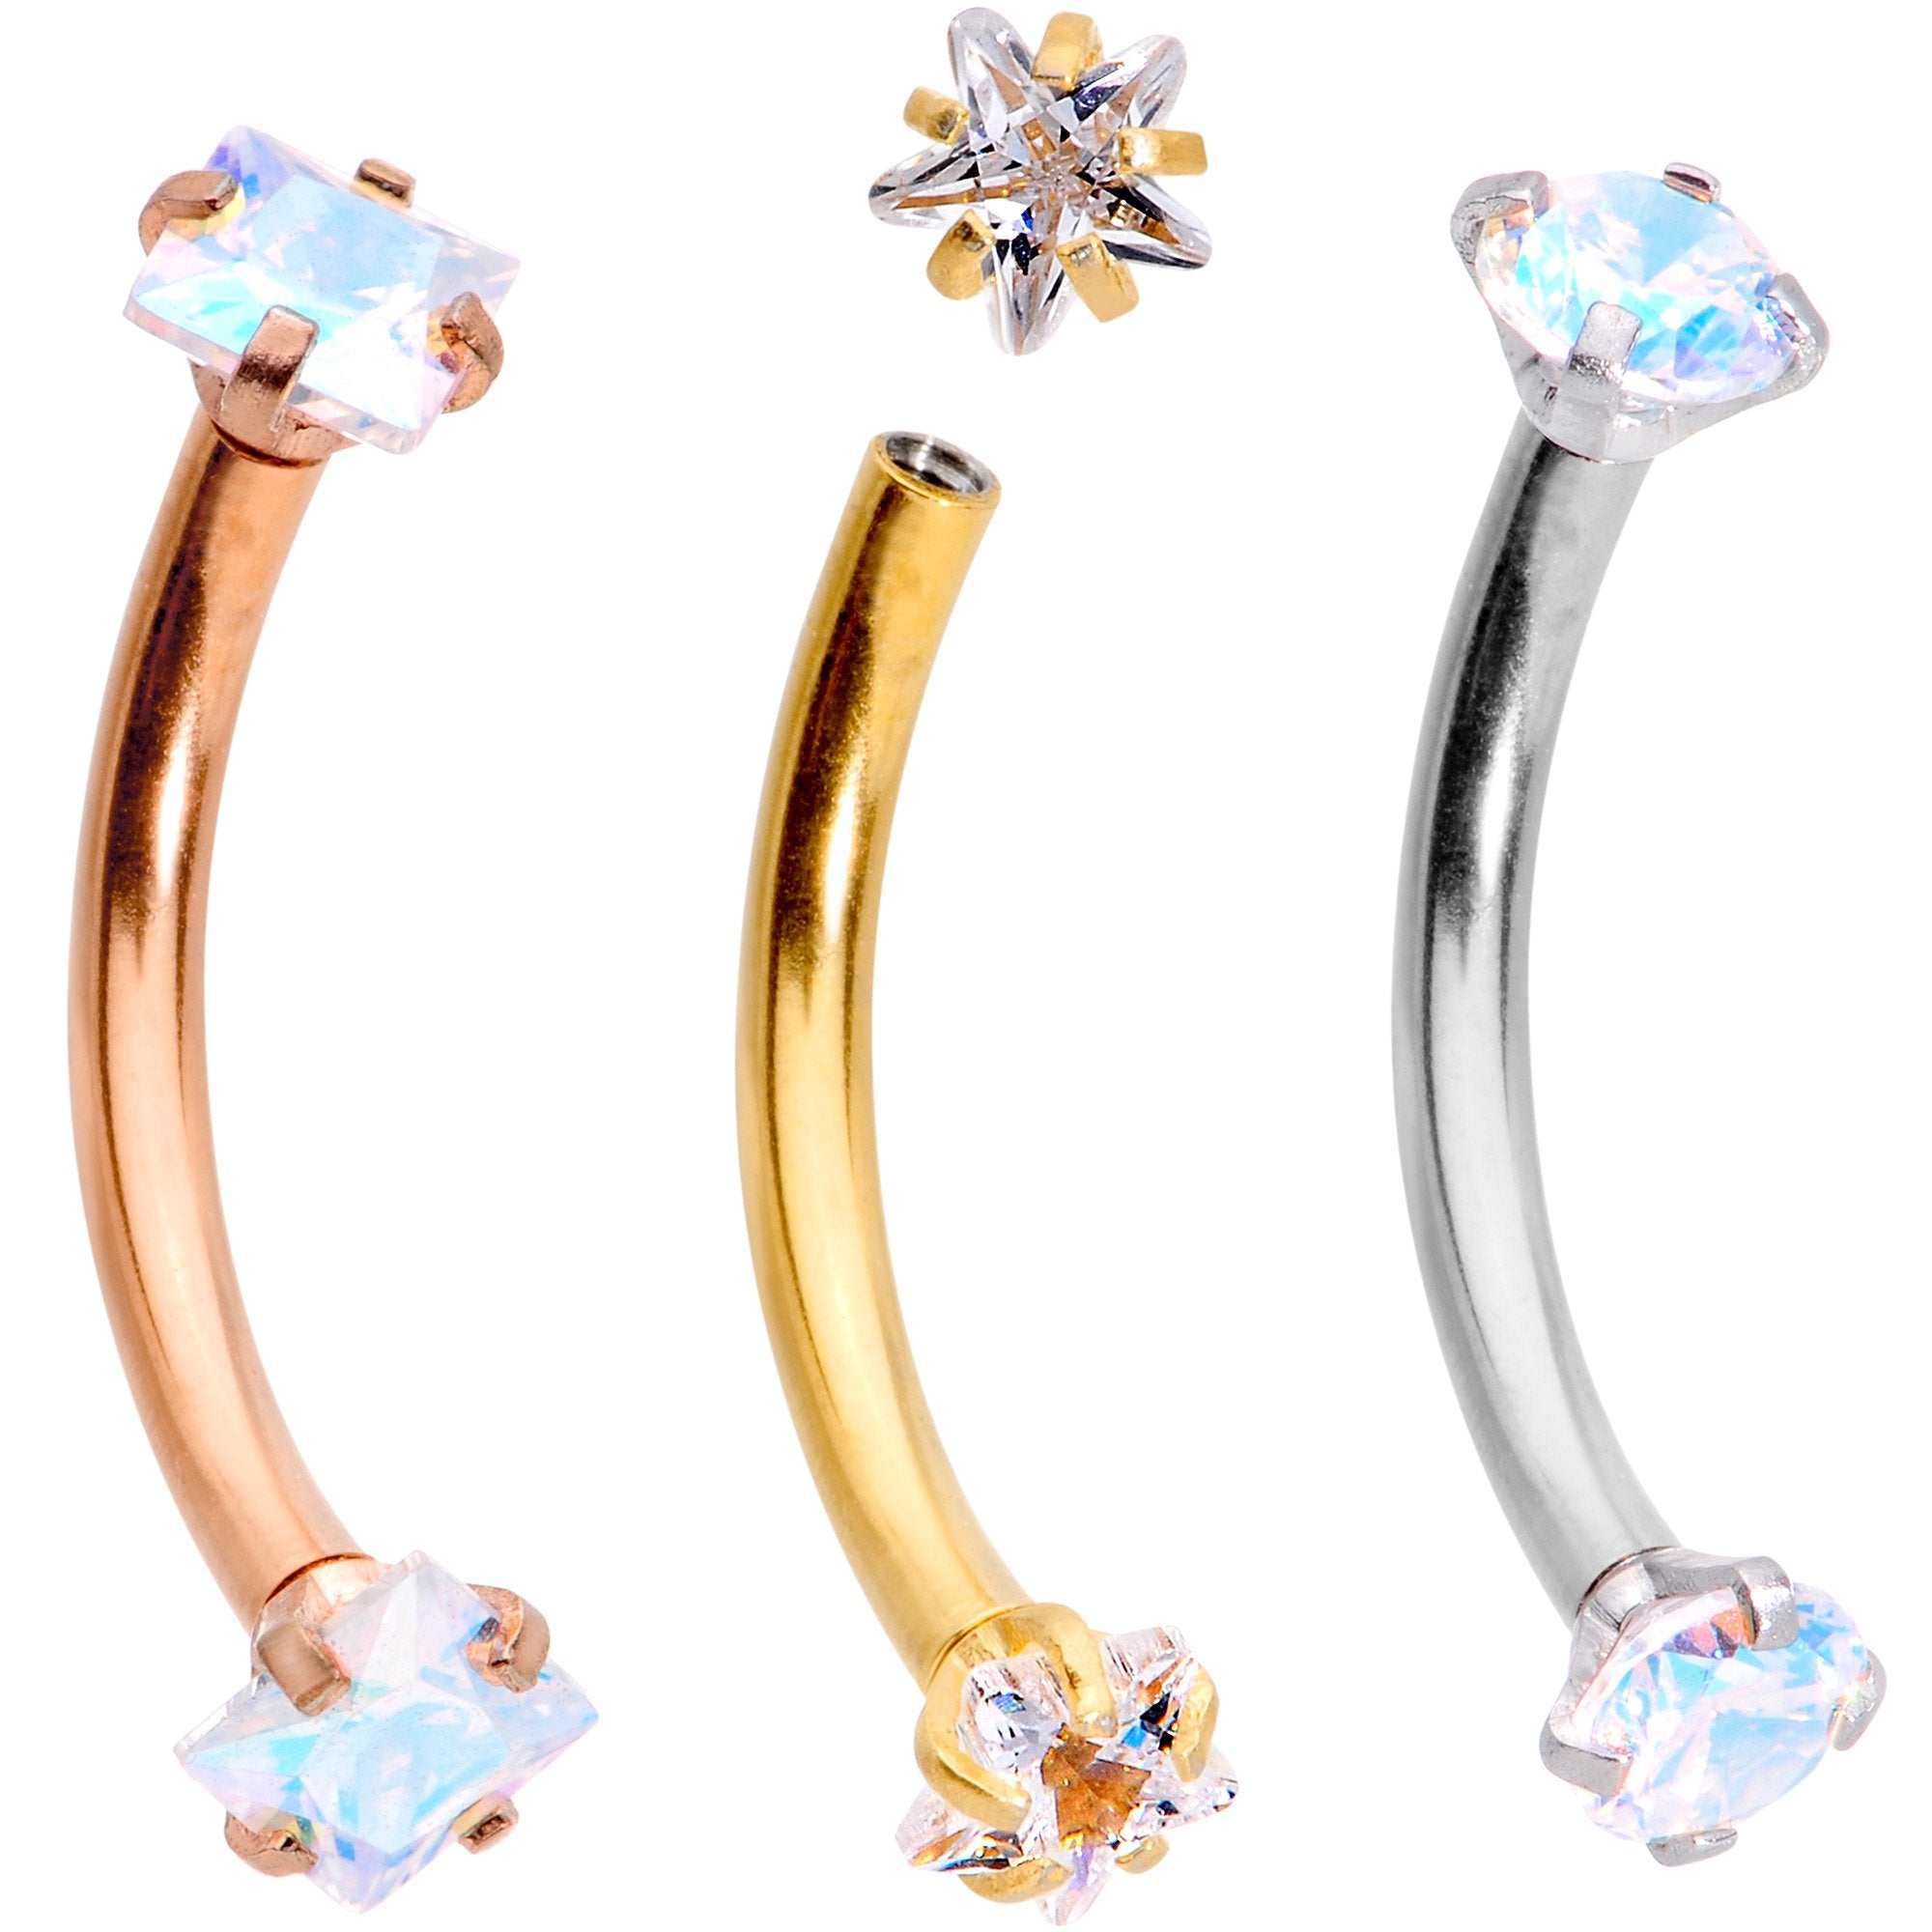 3/8 Clear Gem Anodized Curved Eyebrow Ring Set of 3